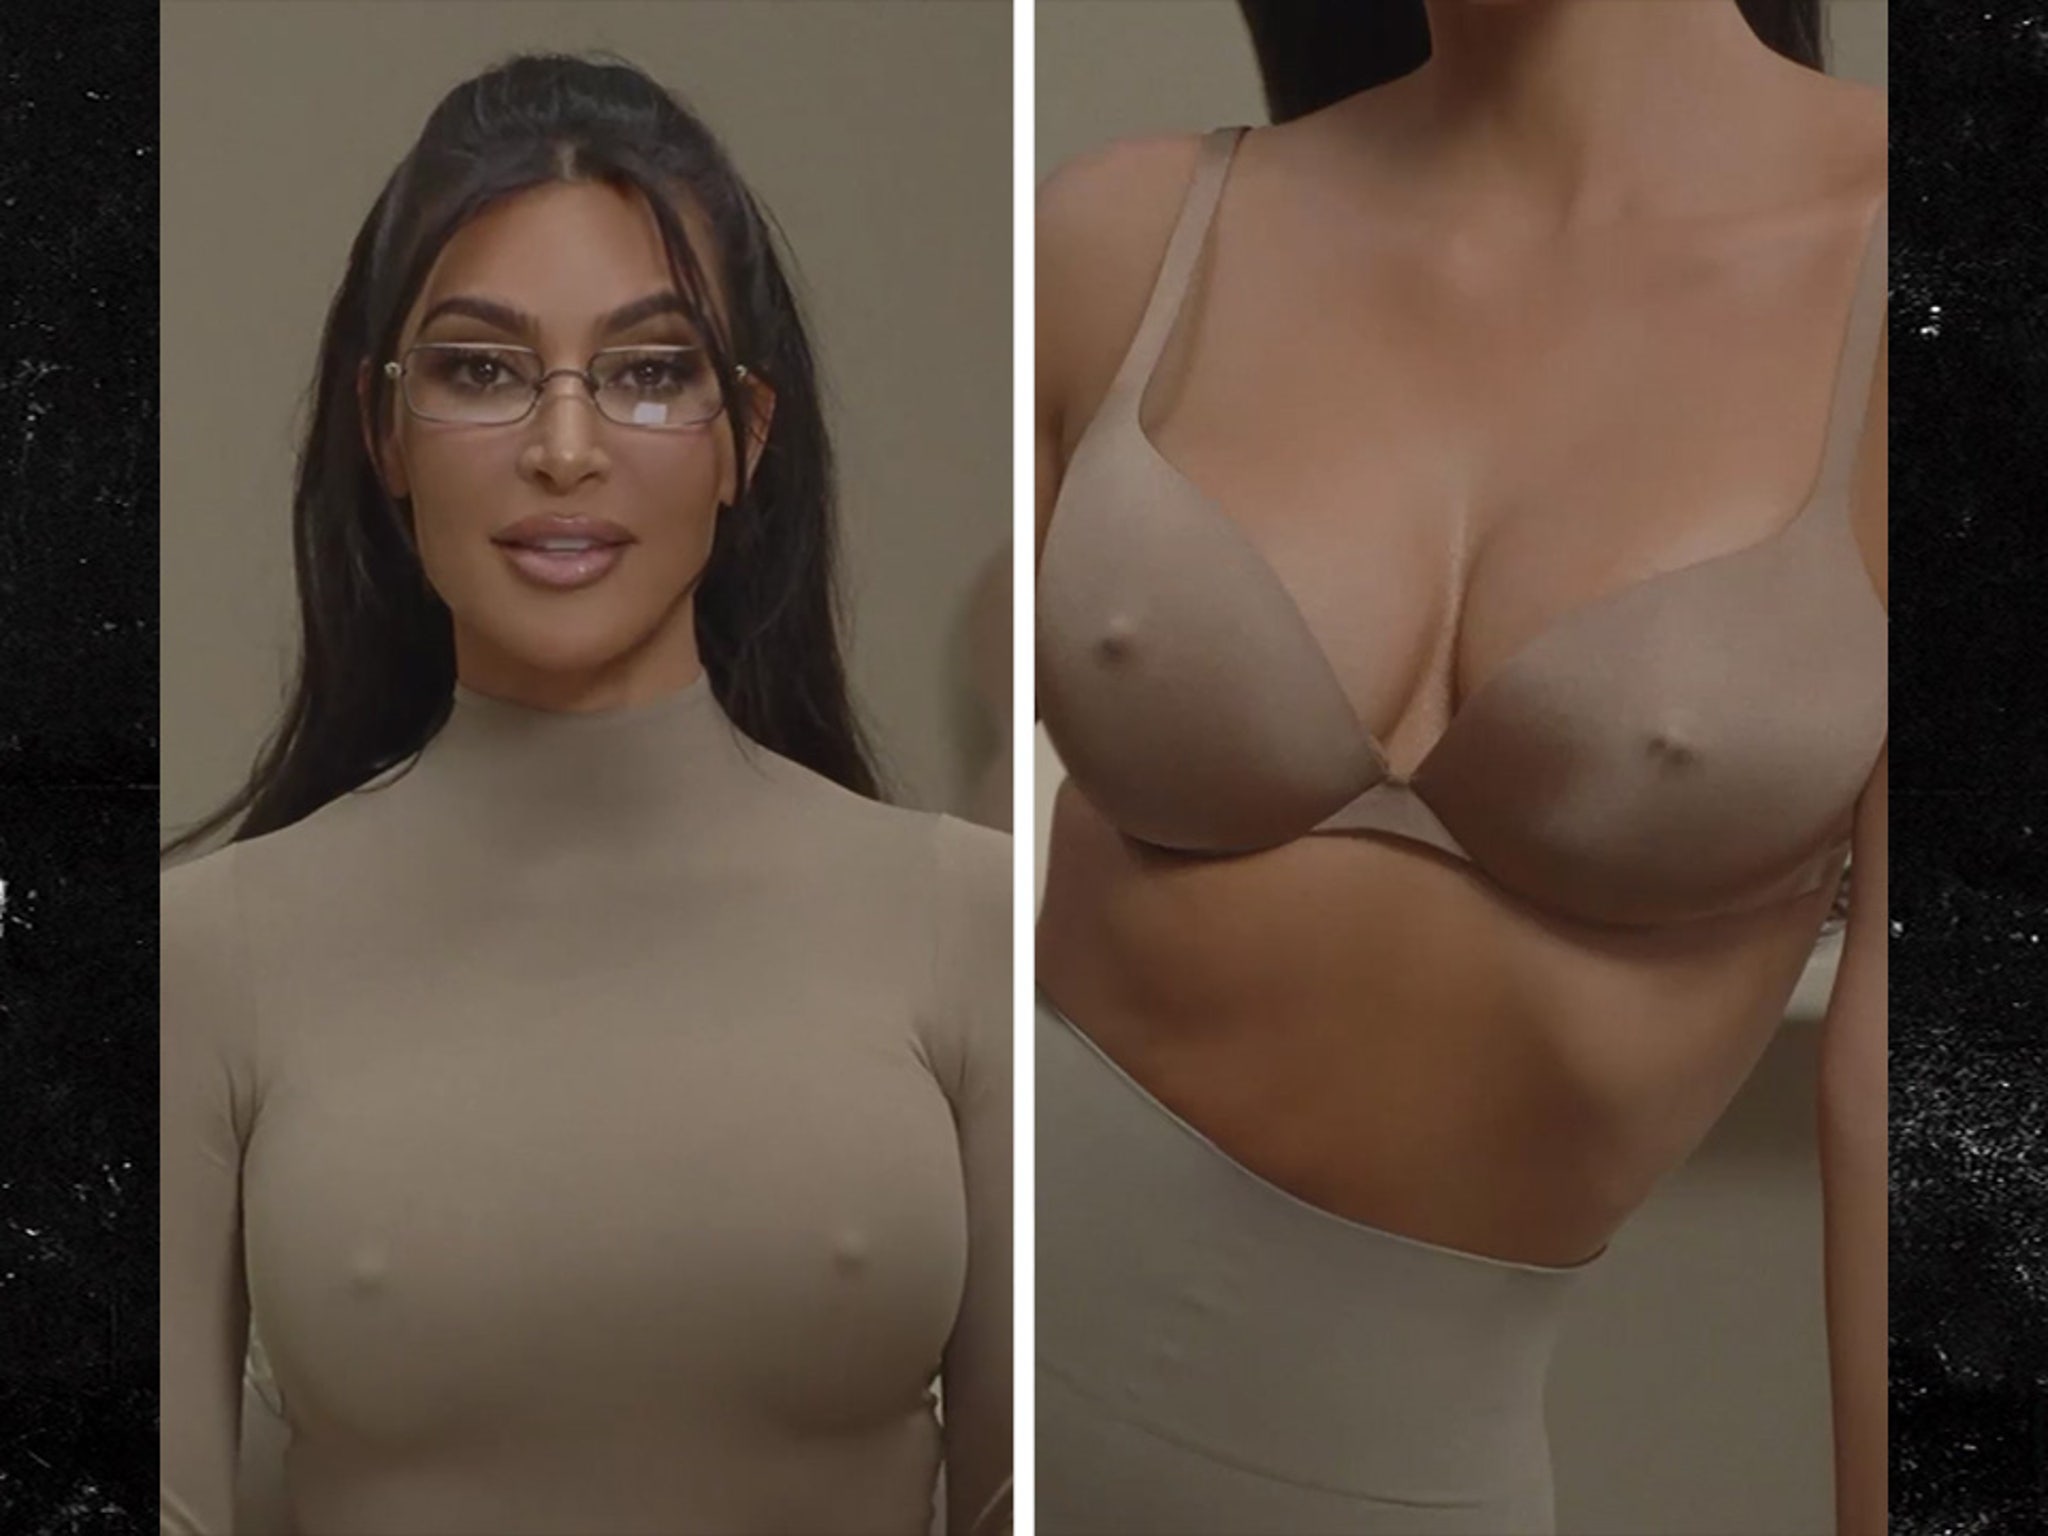 Kim Kardashian's 'push up bra' with fake nipples built in sold out online:  'Get lots of attention